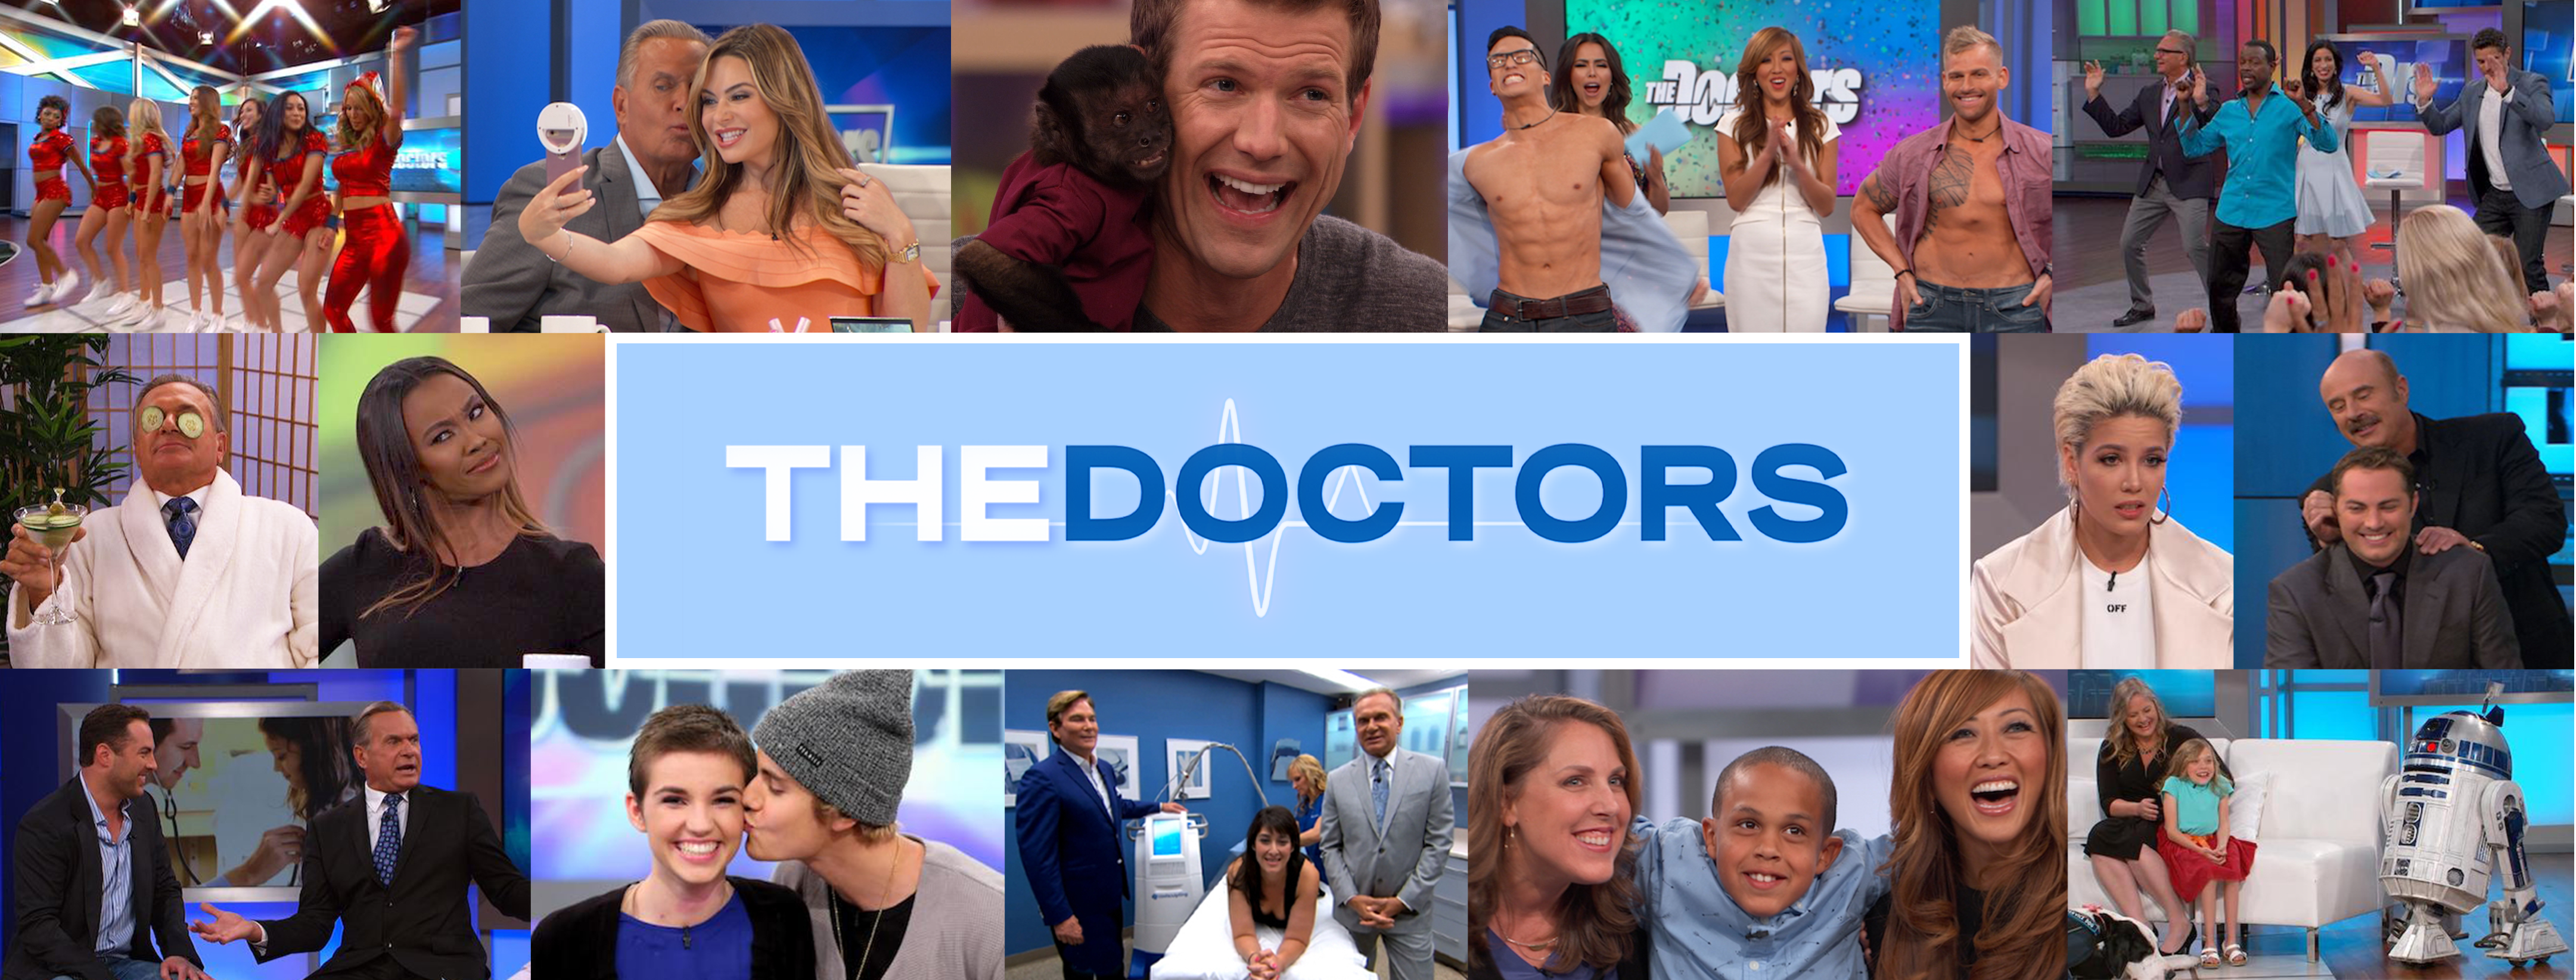 I Was Brutally Assaulted on Snapchat! | The Doctors TV Show